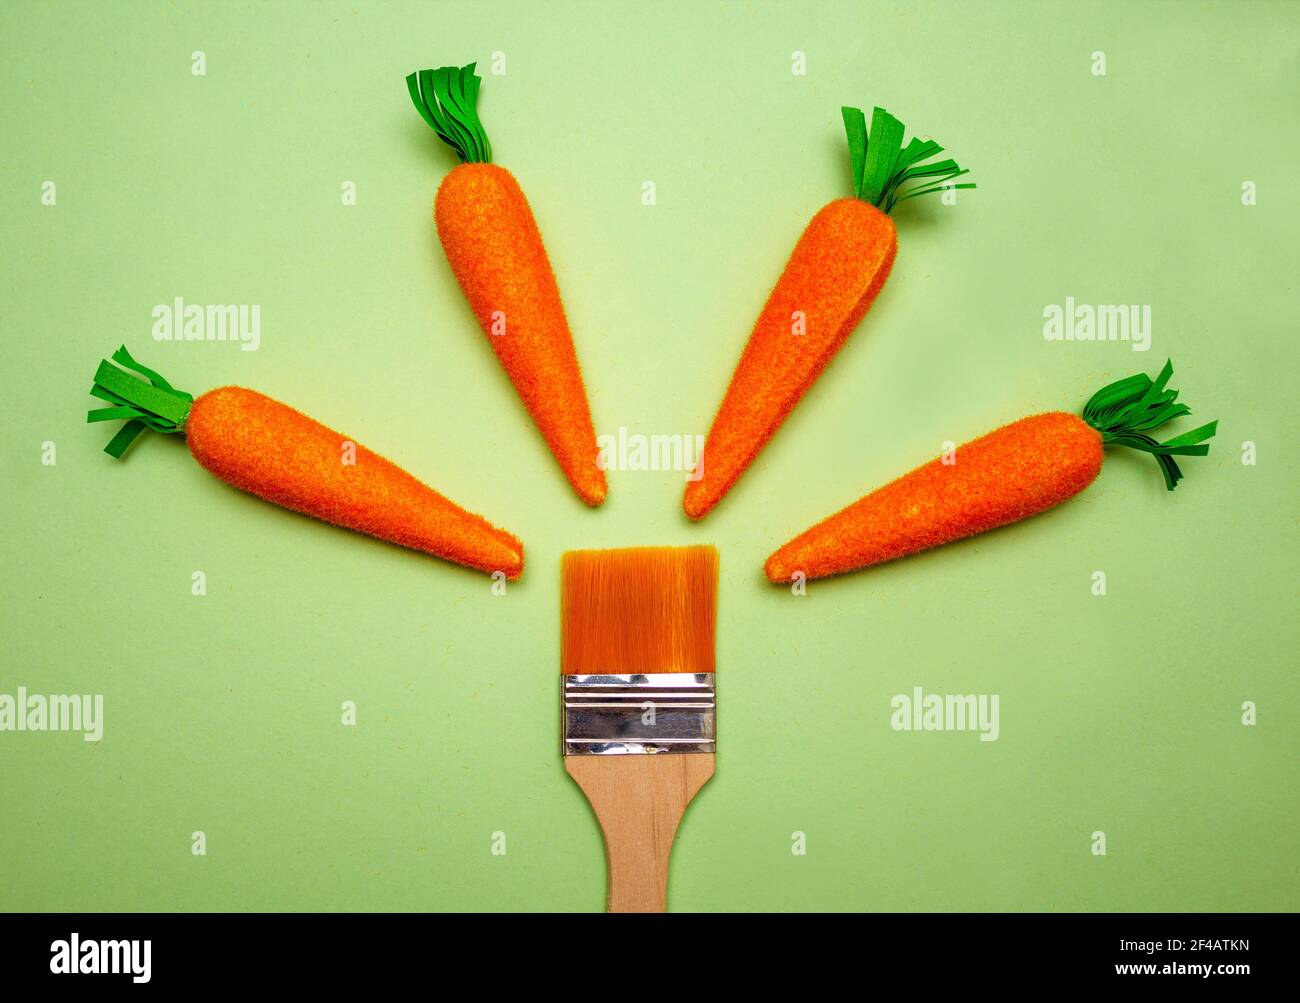 Four carrots with a paint brush on the bottom on green background. Easter, spring holidays concept Stock Photo